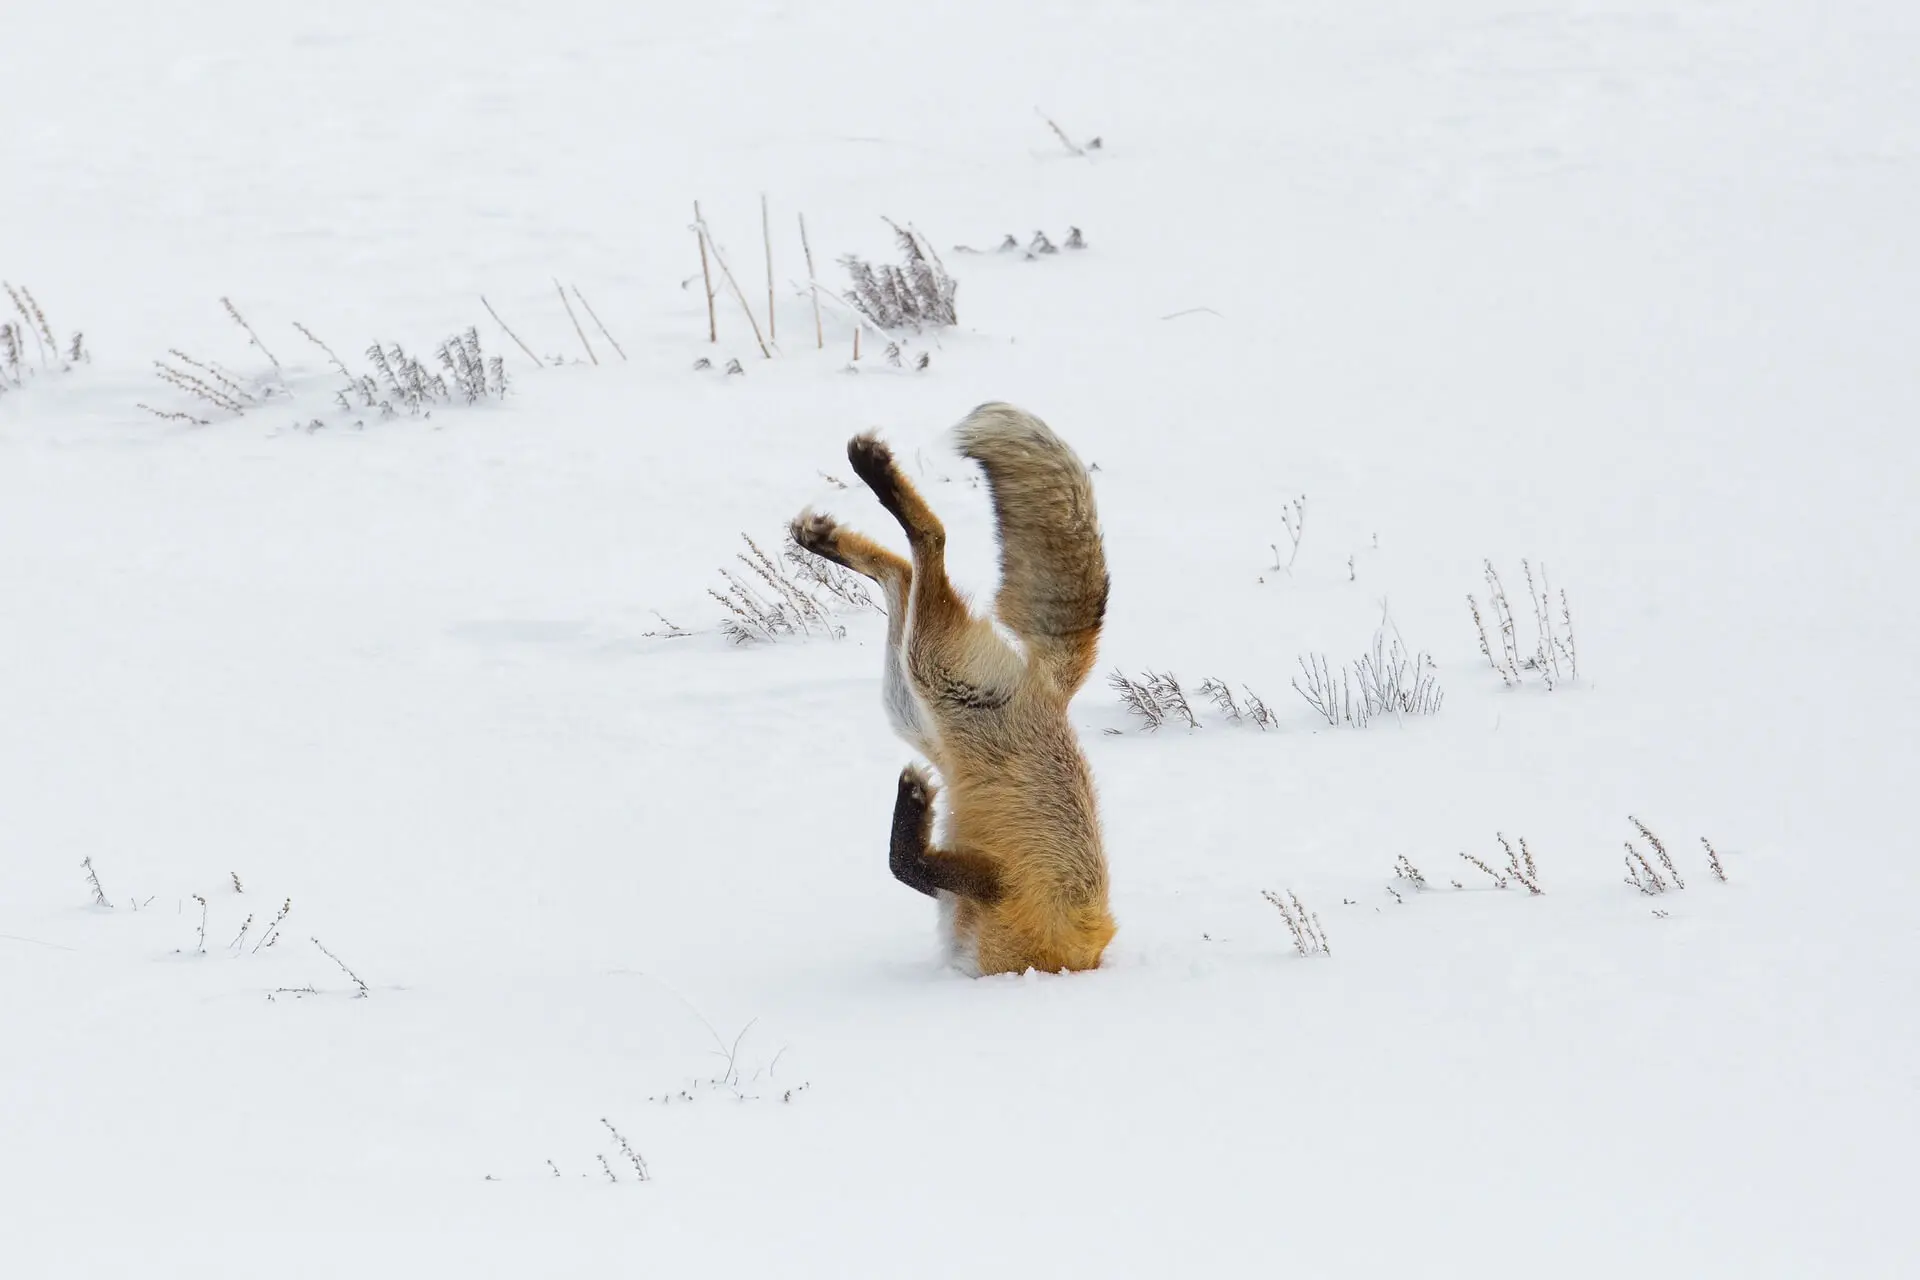 A fox diving in the snow